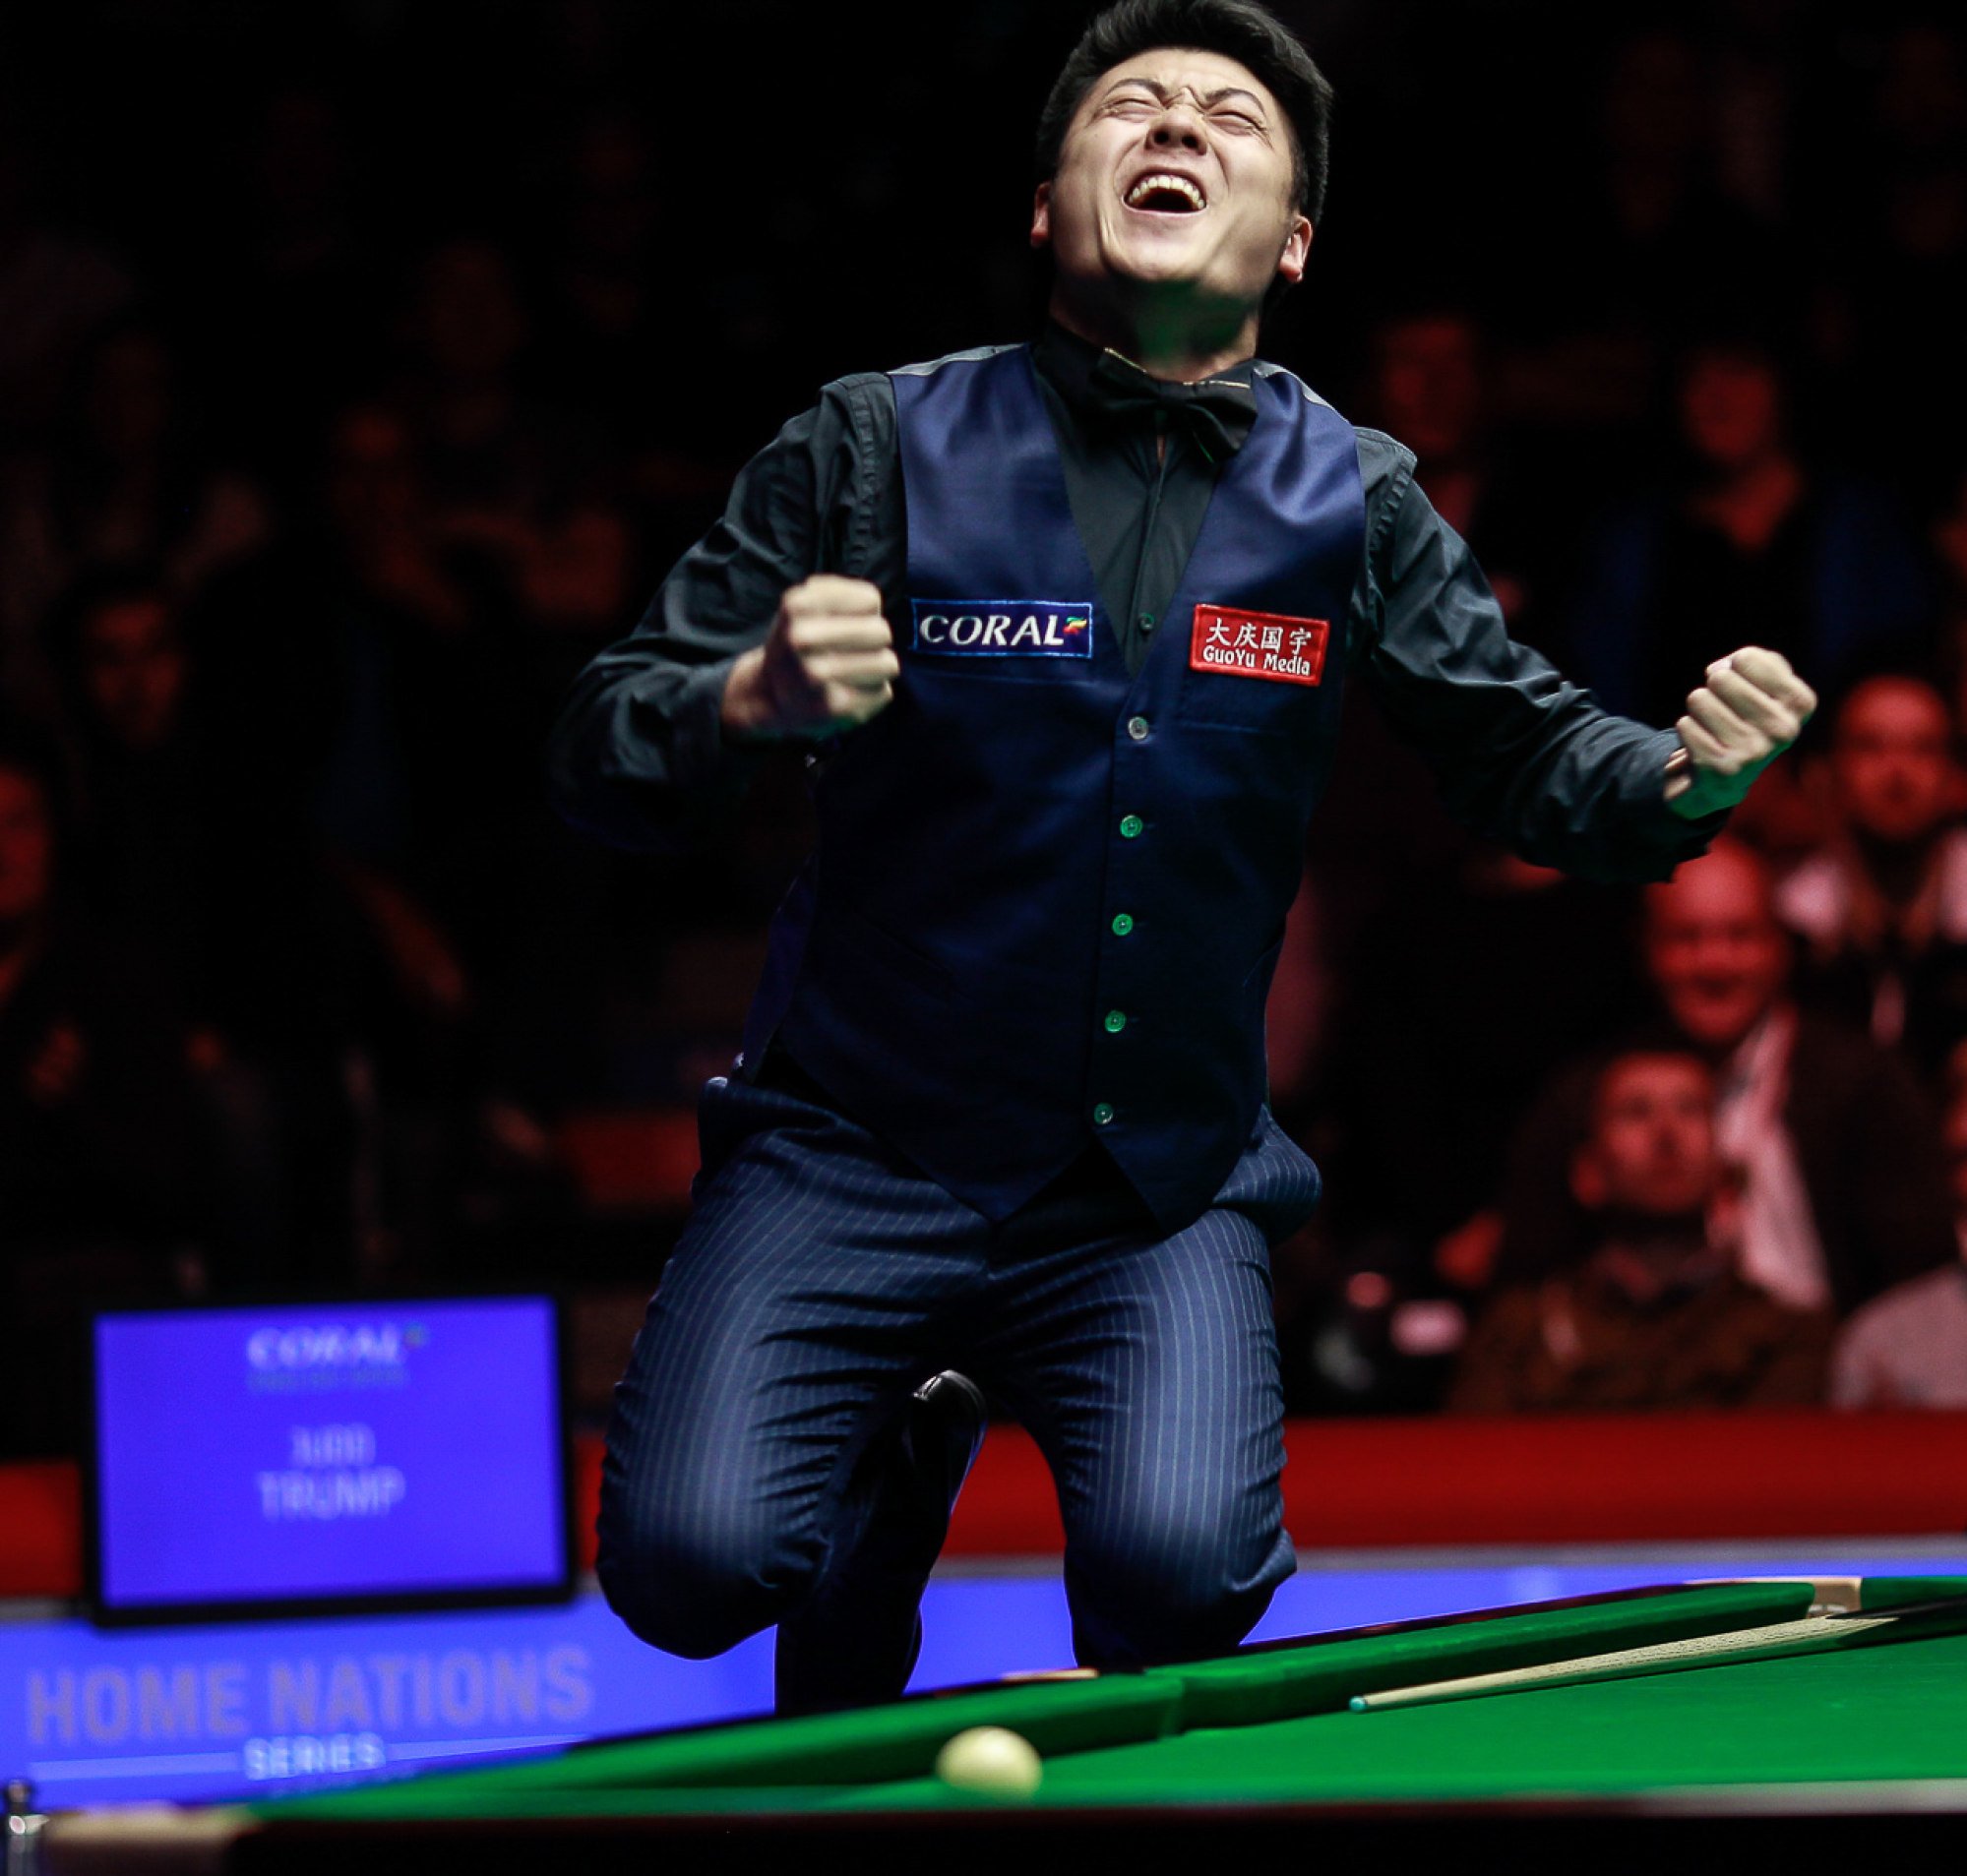 Which snooker players were banned for match fixing, for how long, and what did they do? South China Morning Post